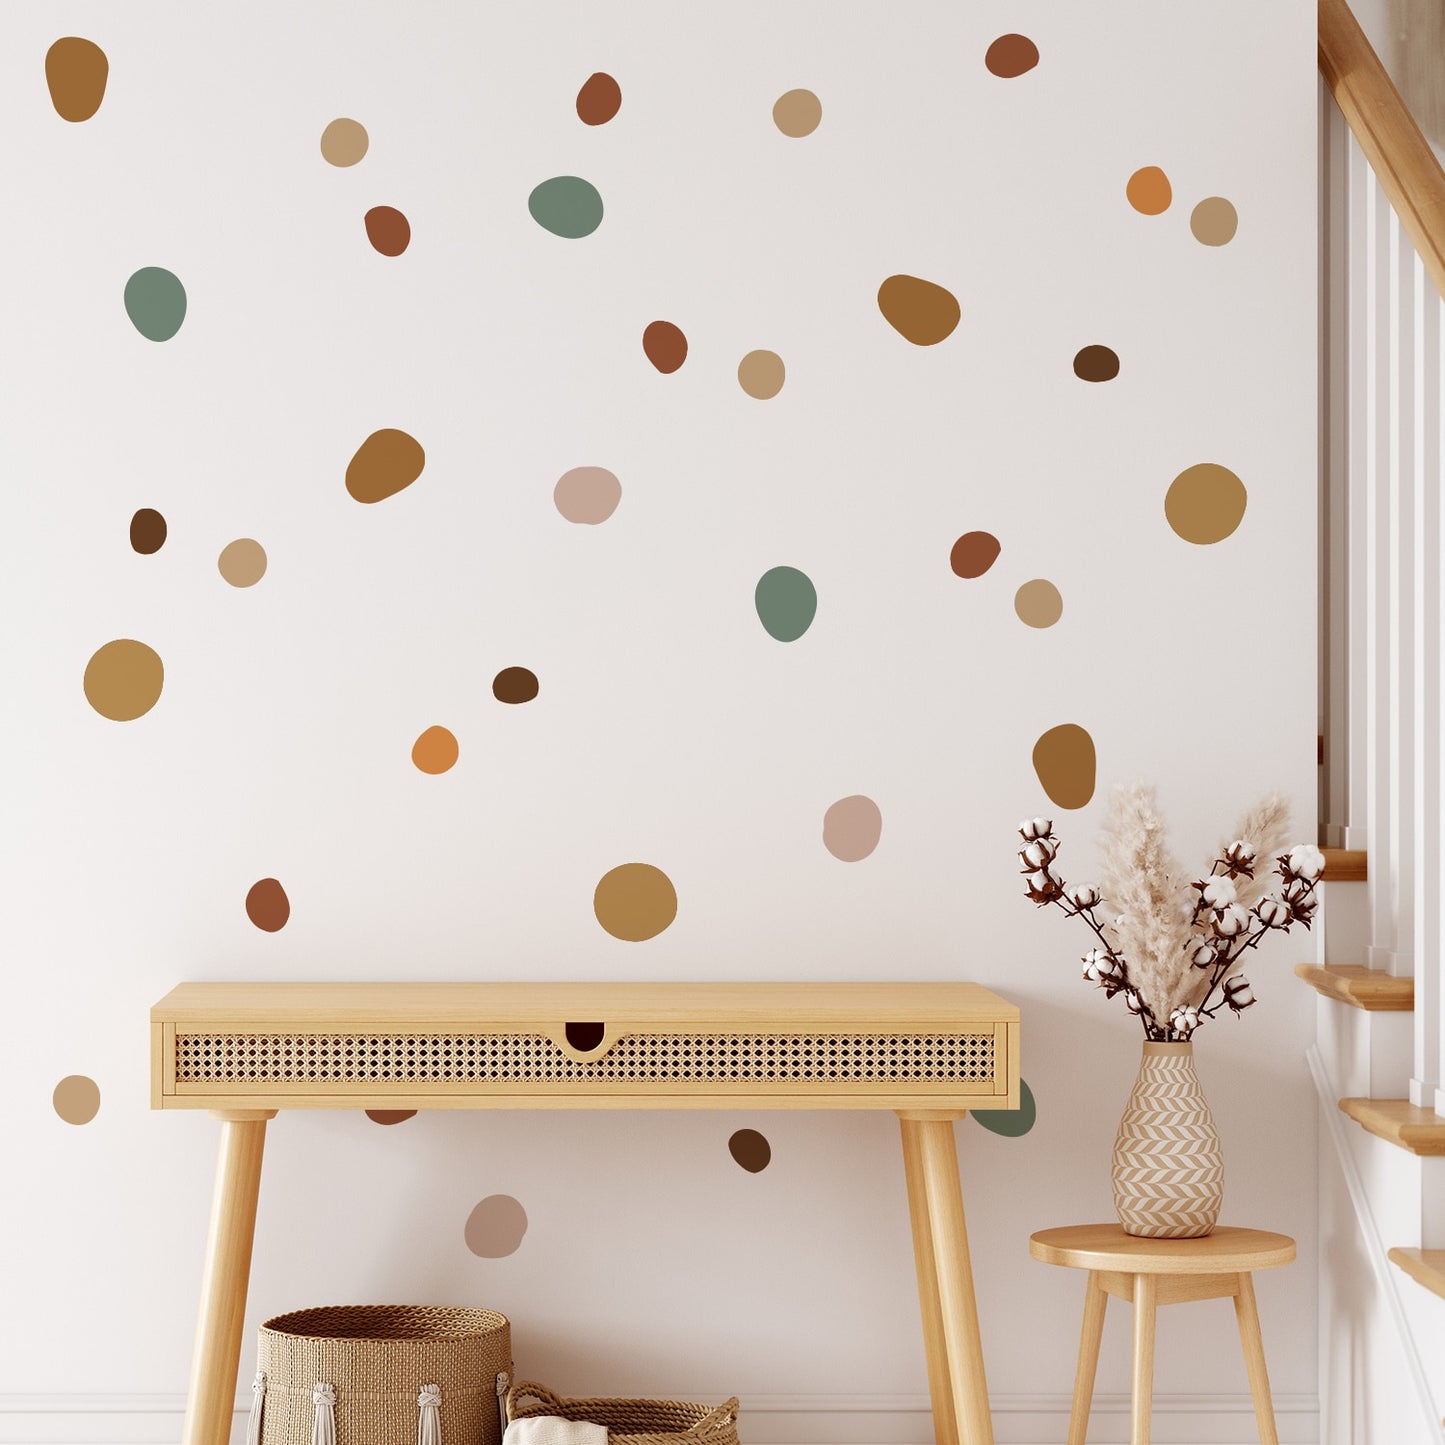 Creative Room Wall Stickers